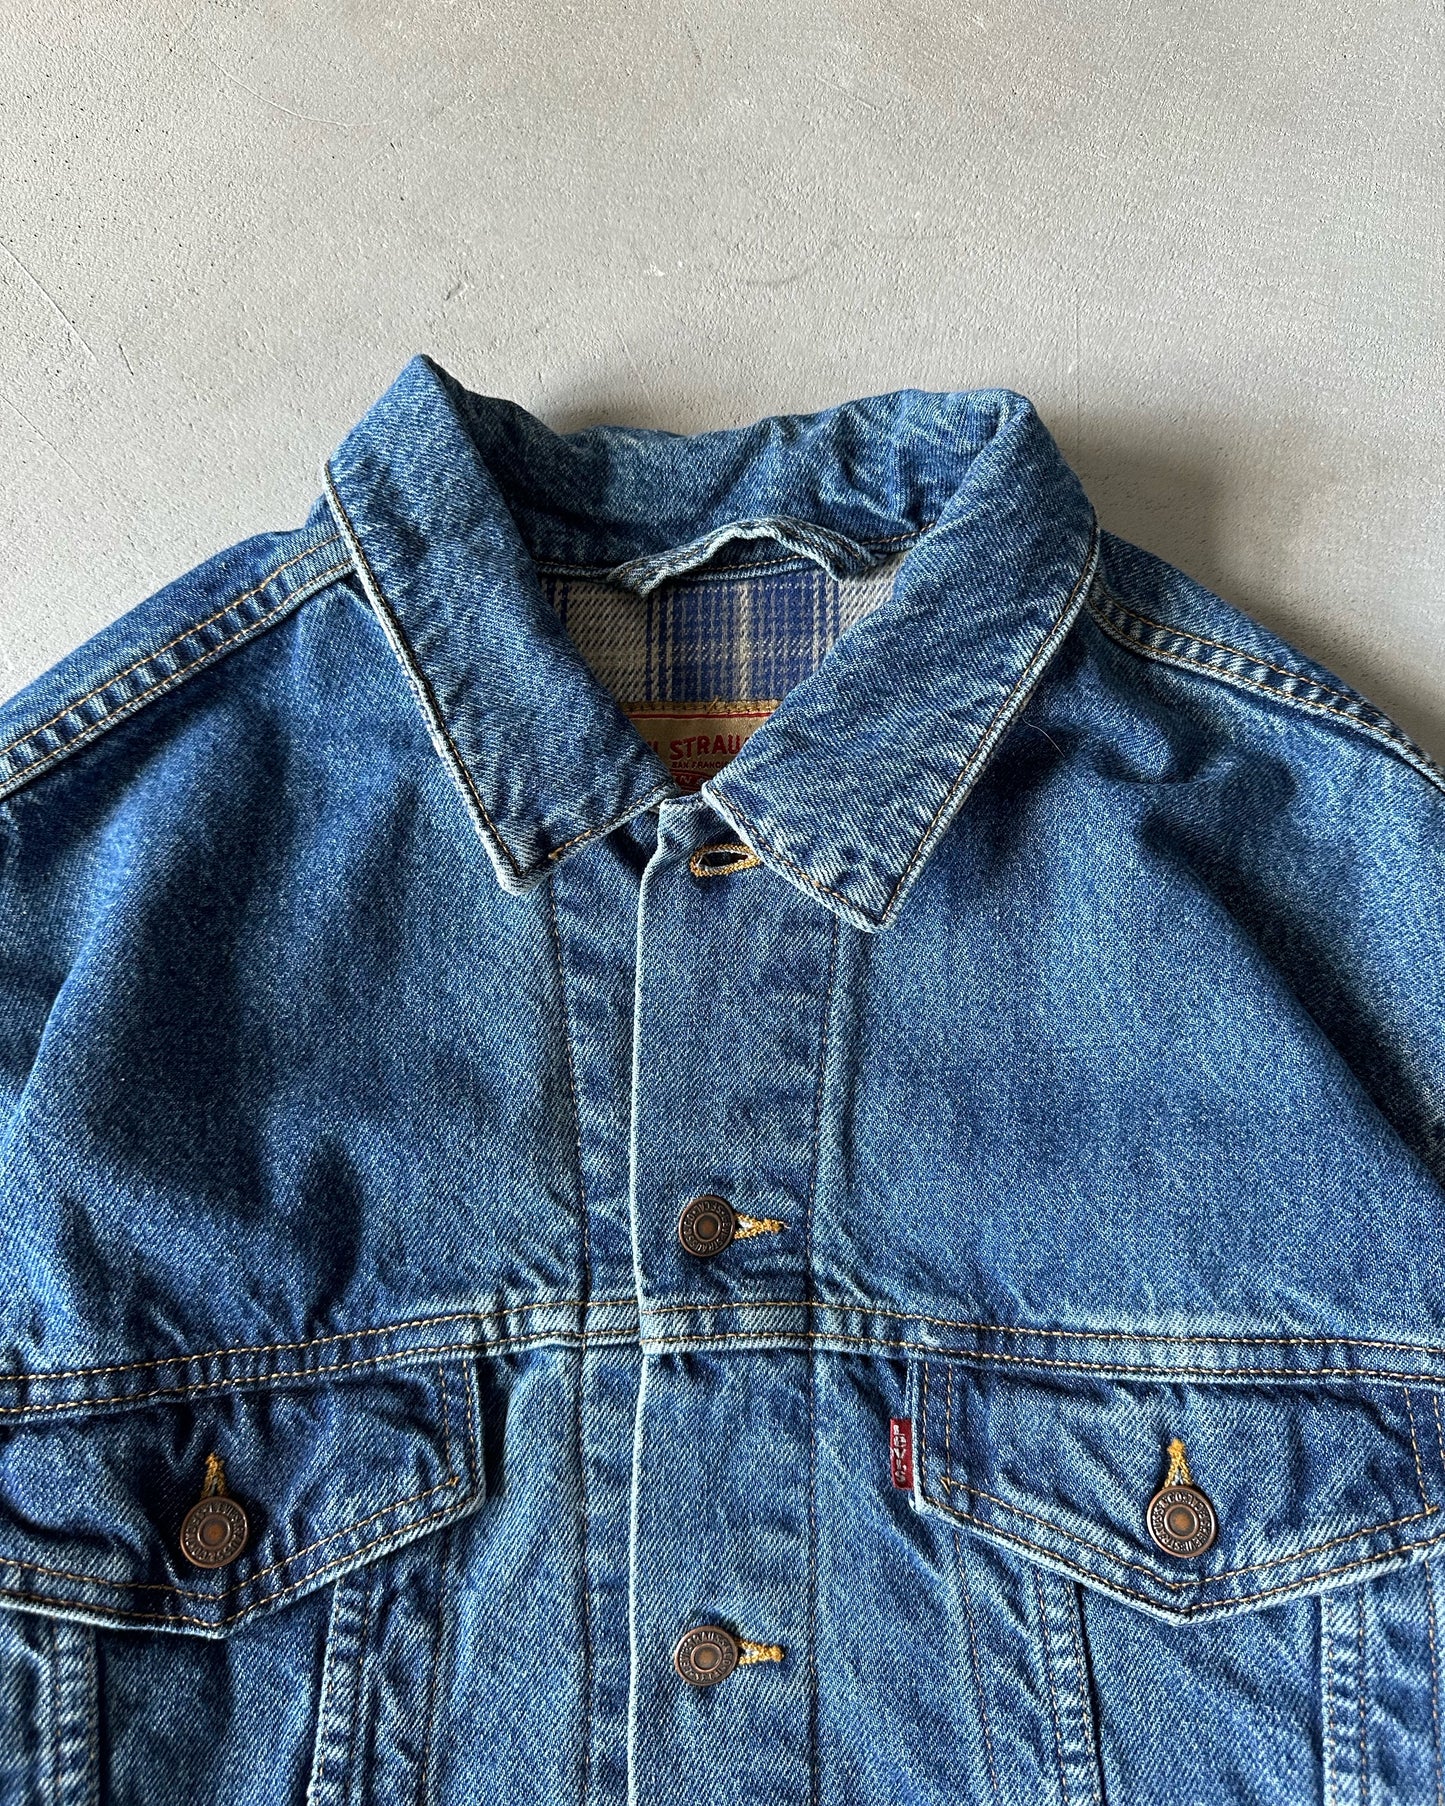 1990s - Levi's Type III Flannel Lined Jeans Jacket - L